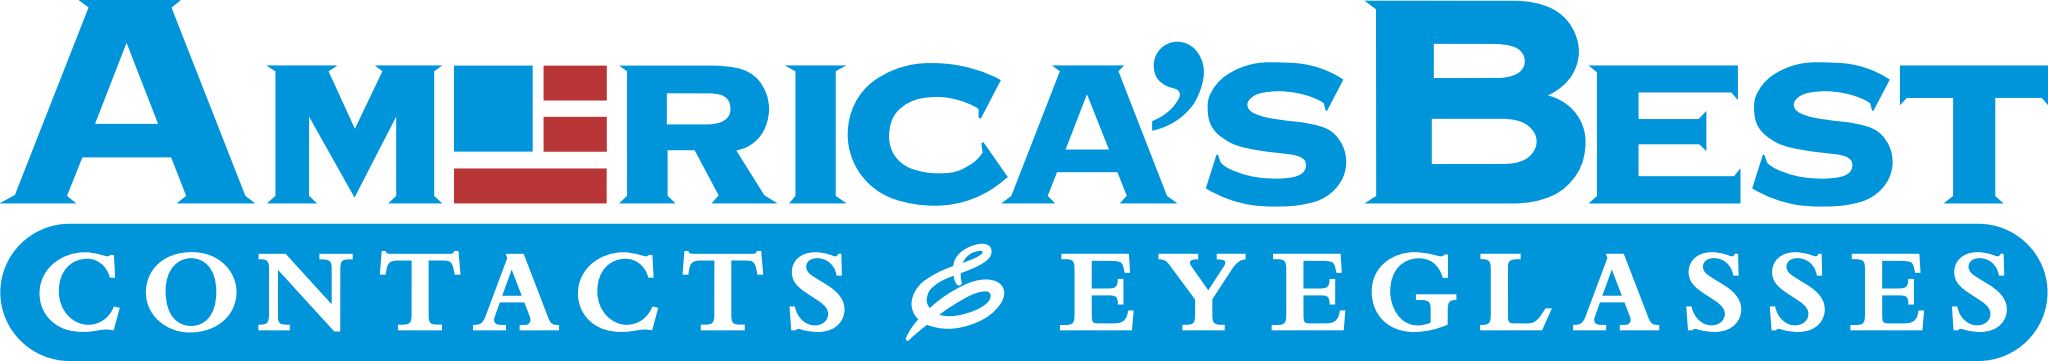 America's Best Contacts & Eyeglasses 